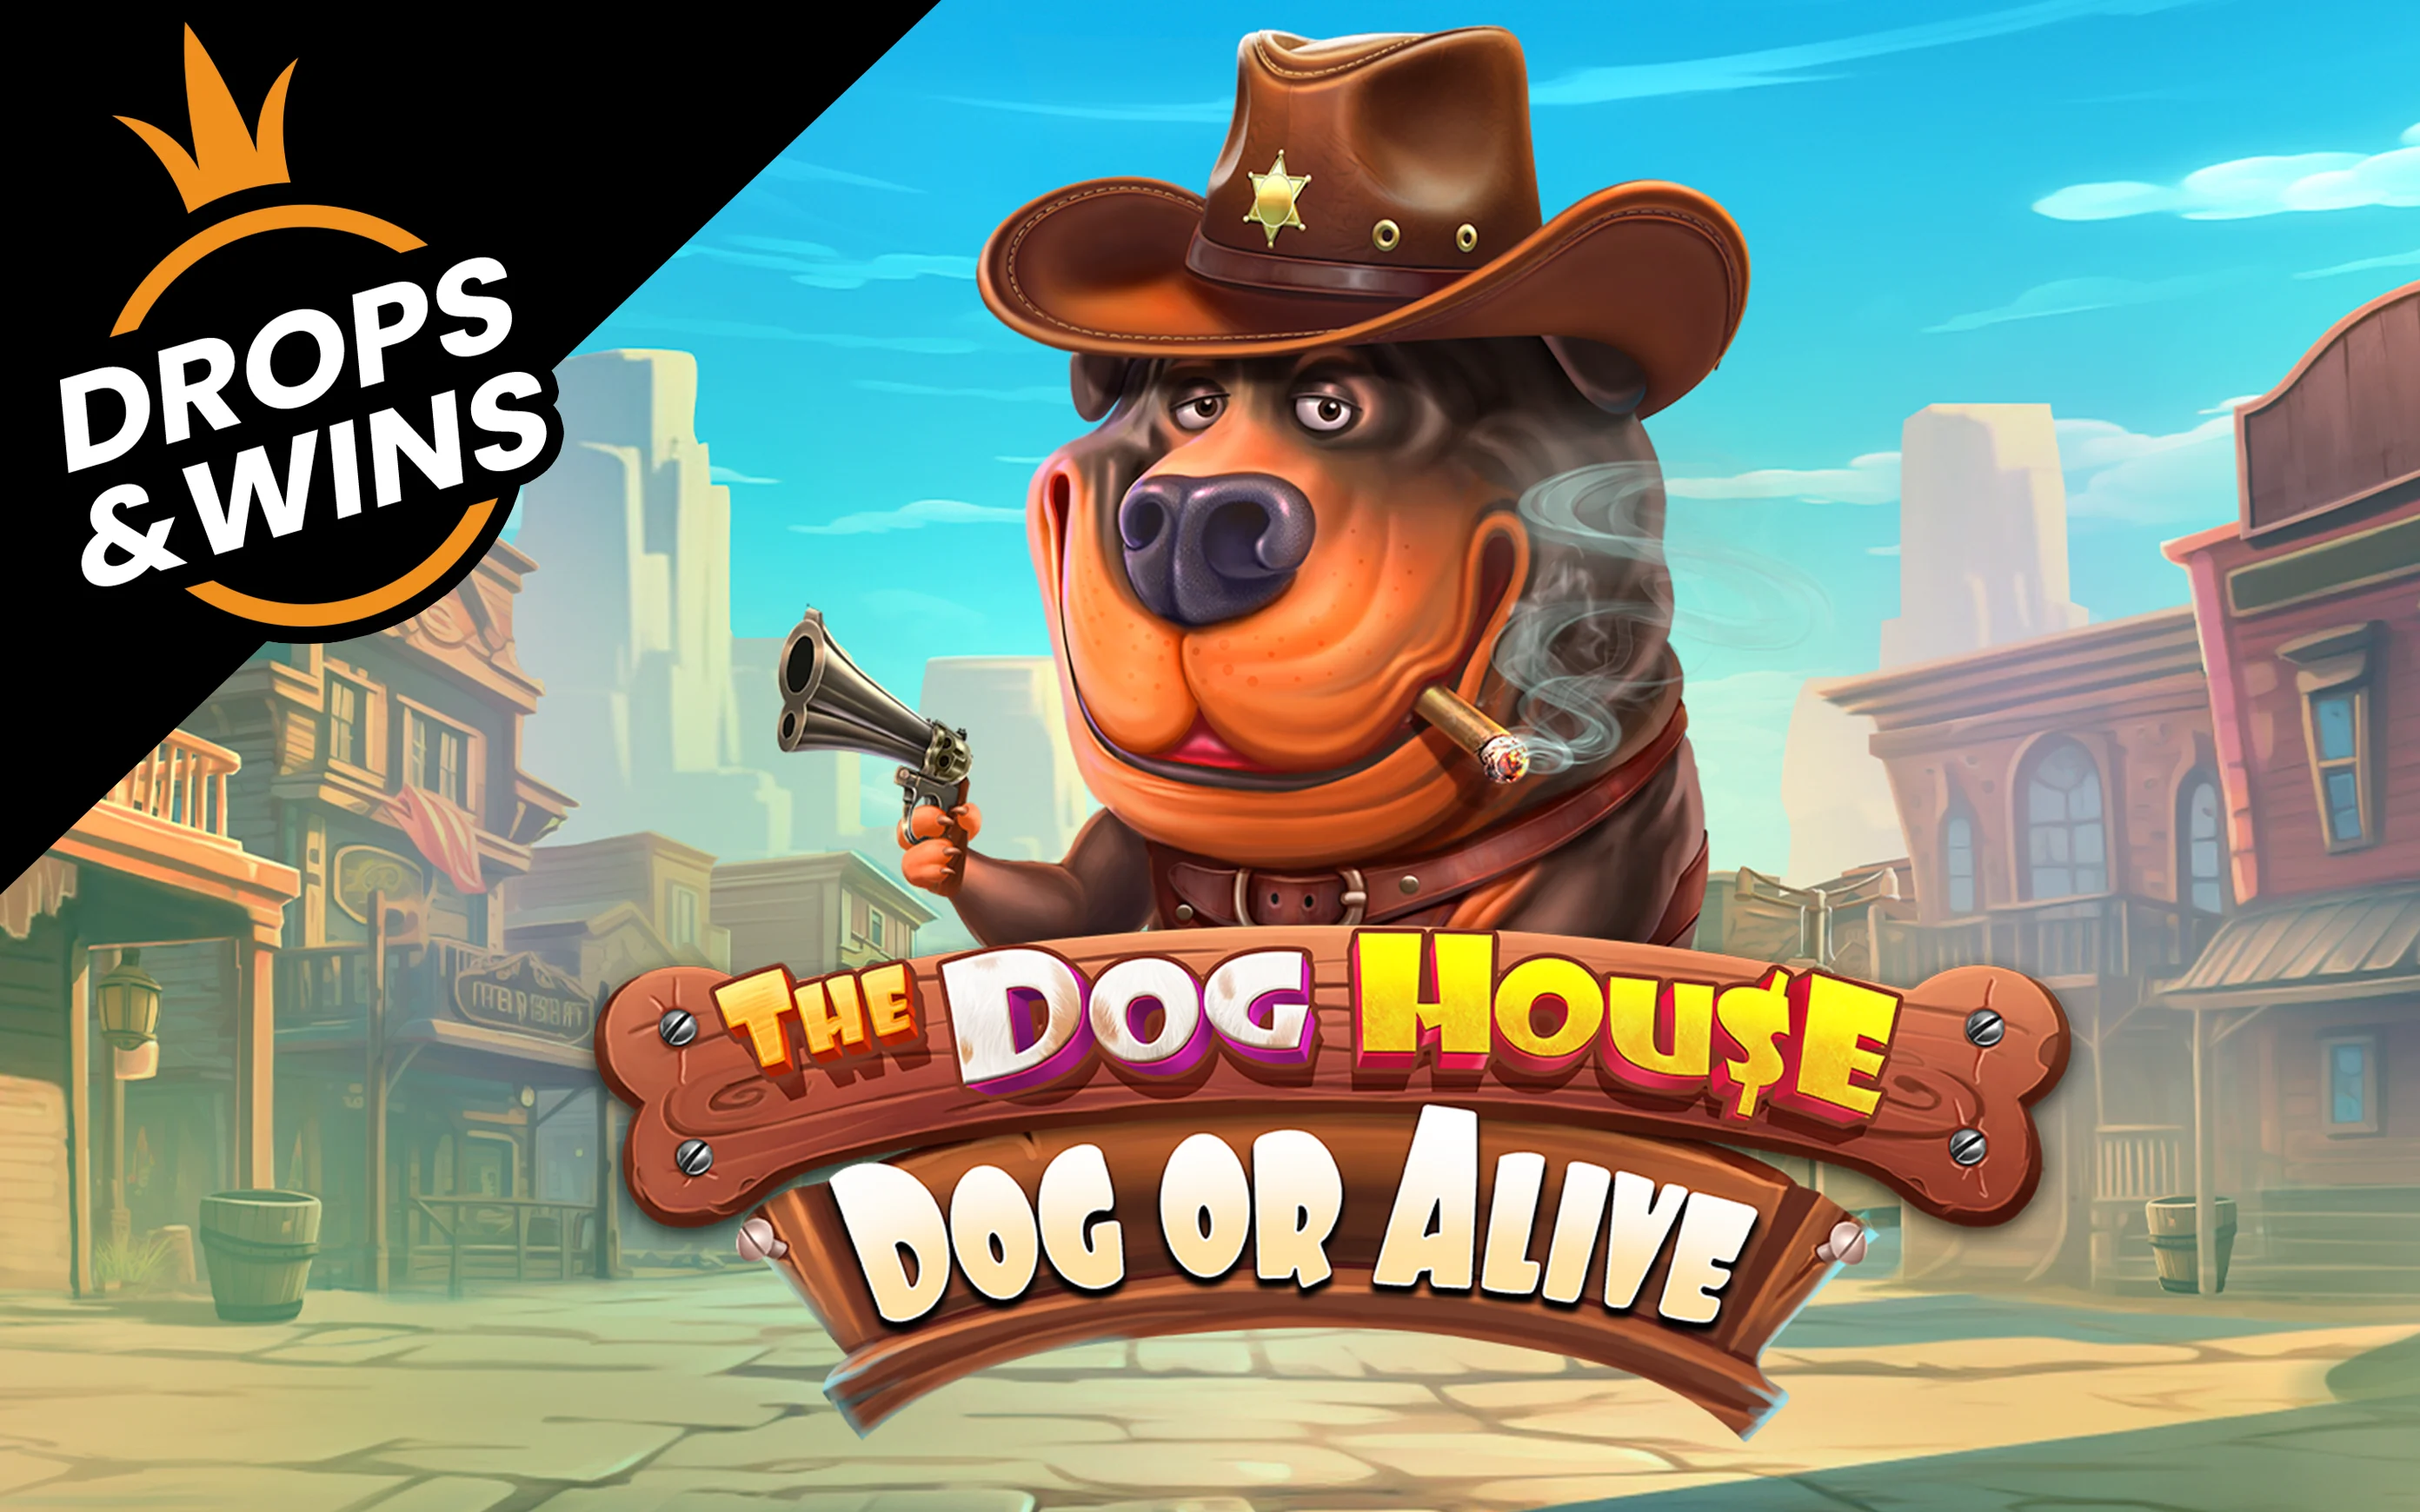 Speel The Dog House – Dog or Alive op Starcasino.be online casino